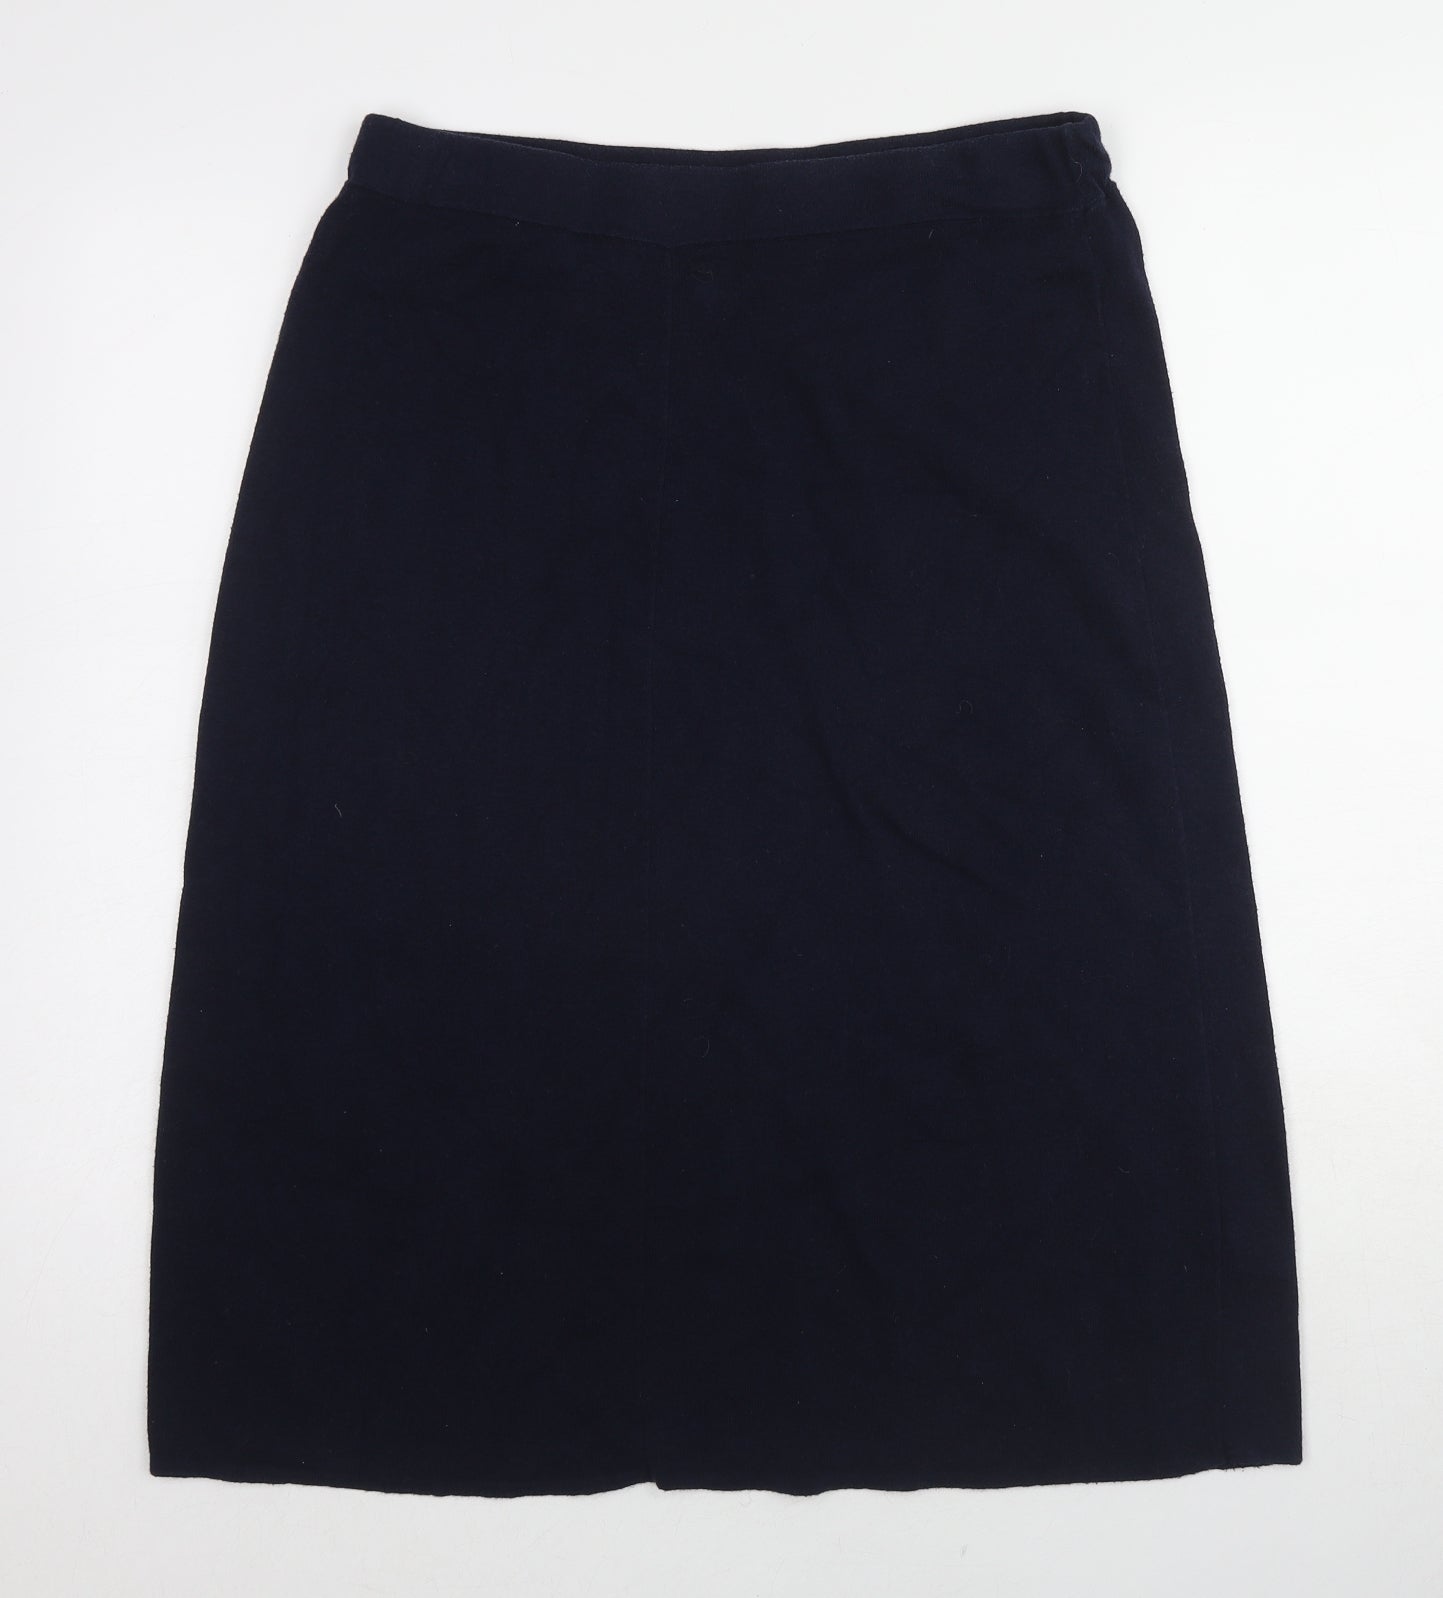 Woolovers Womens Blue Cotton A-Line Skirt Size M